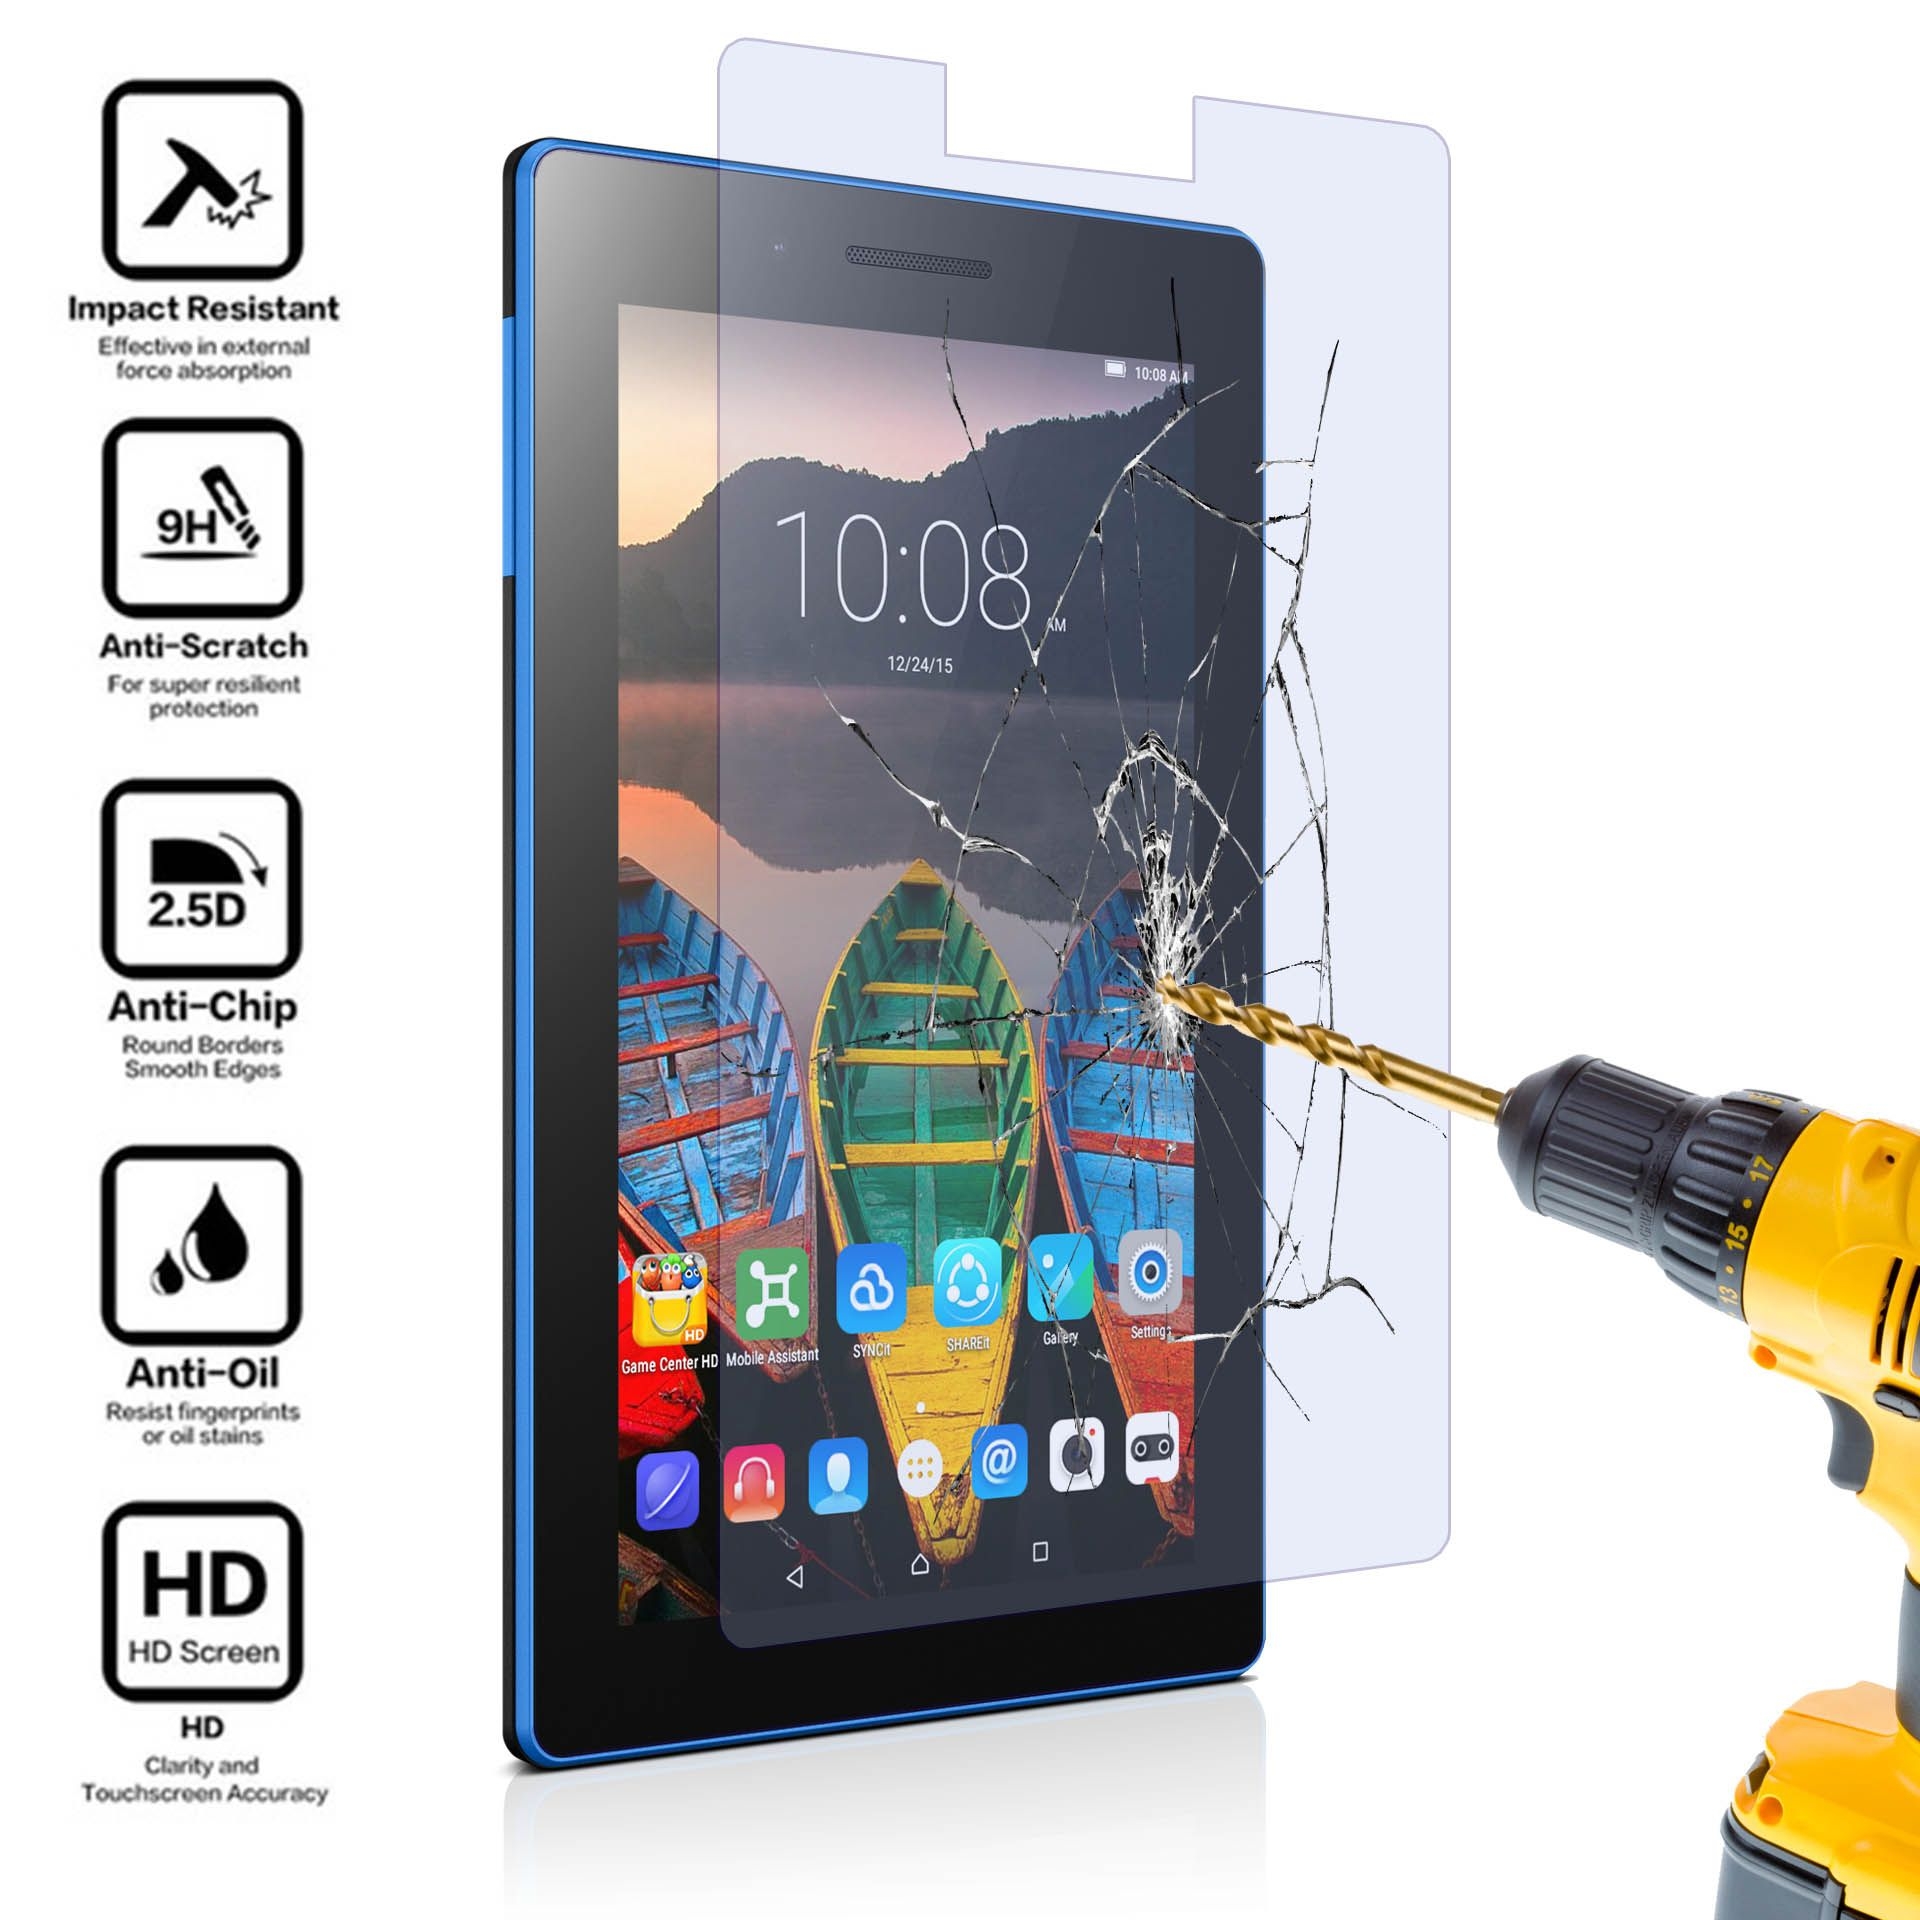 Tempered glass screen protector for tablets – Apple iPad 2/3/4